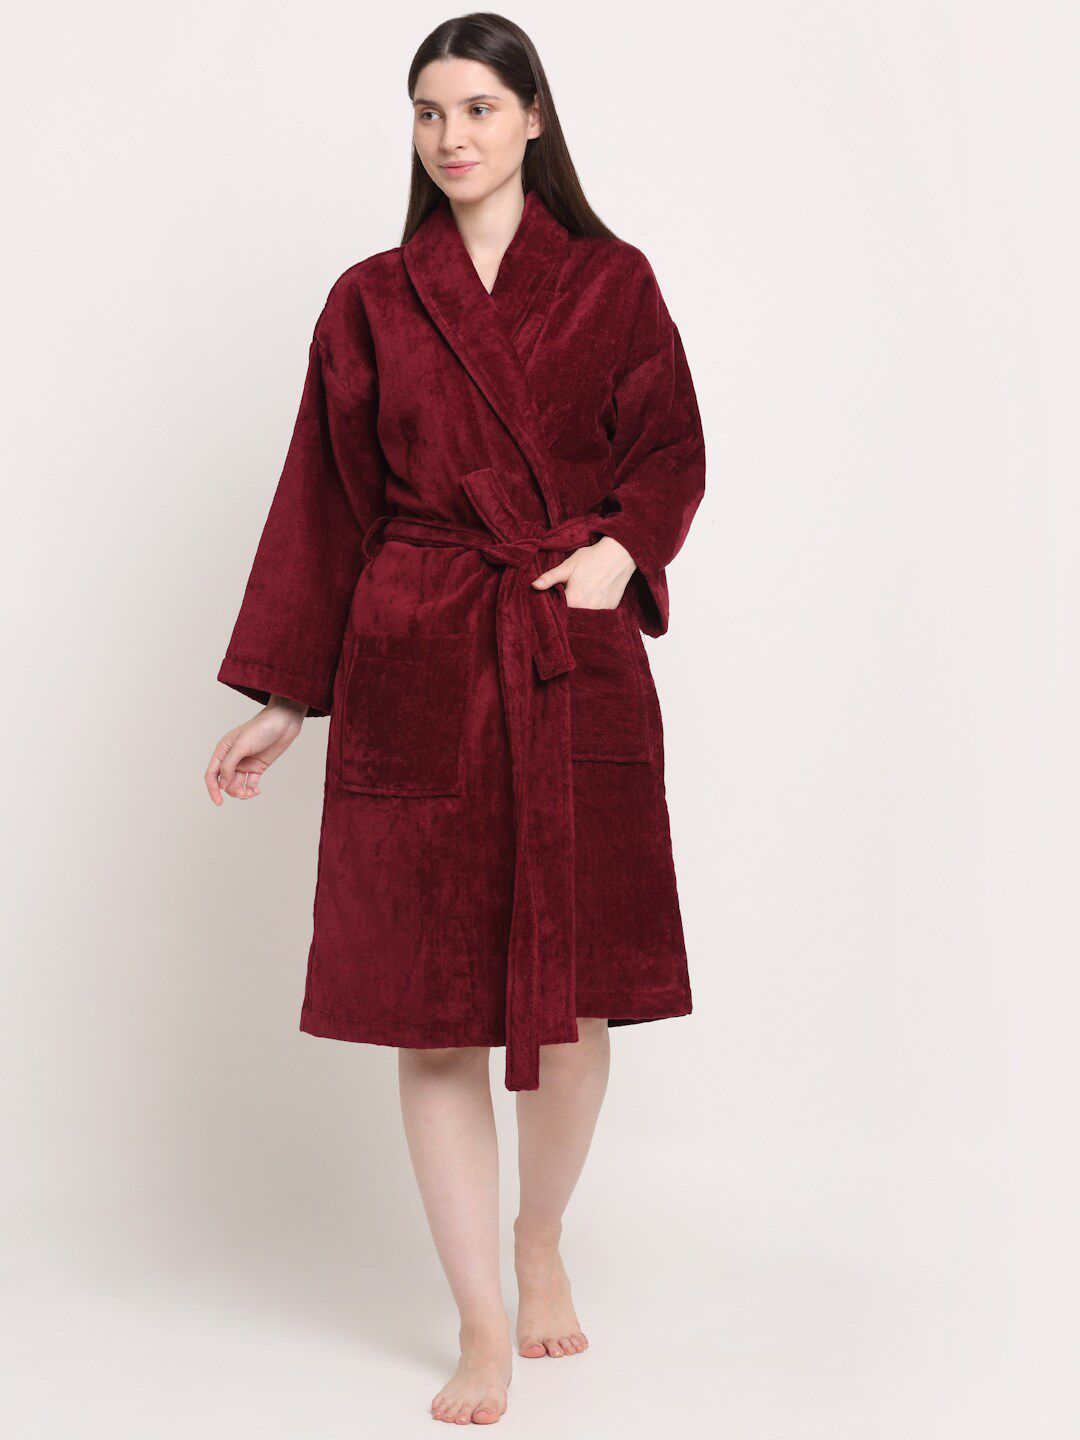 Creeva Red Solid Bath Robe Price in India